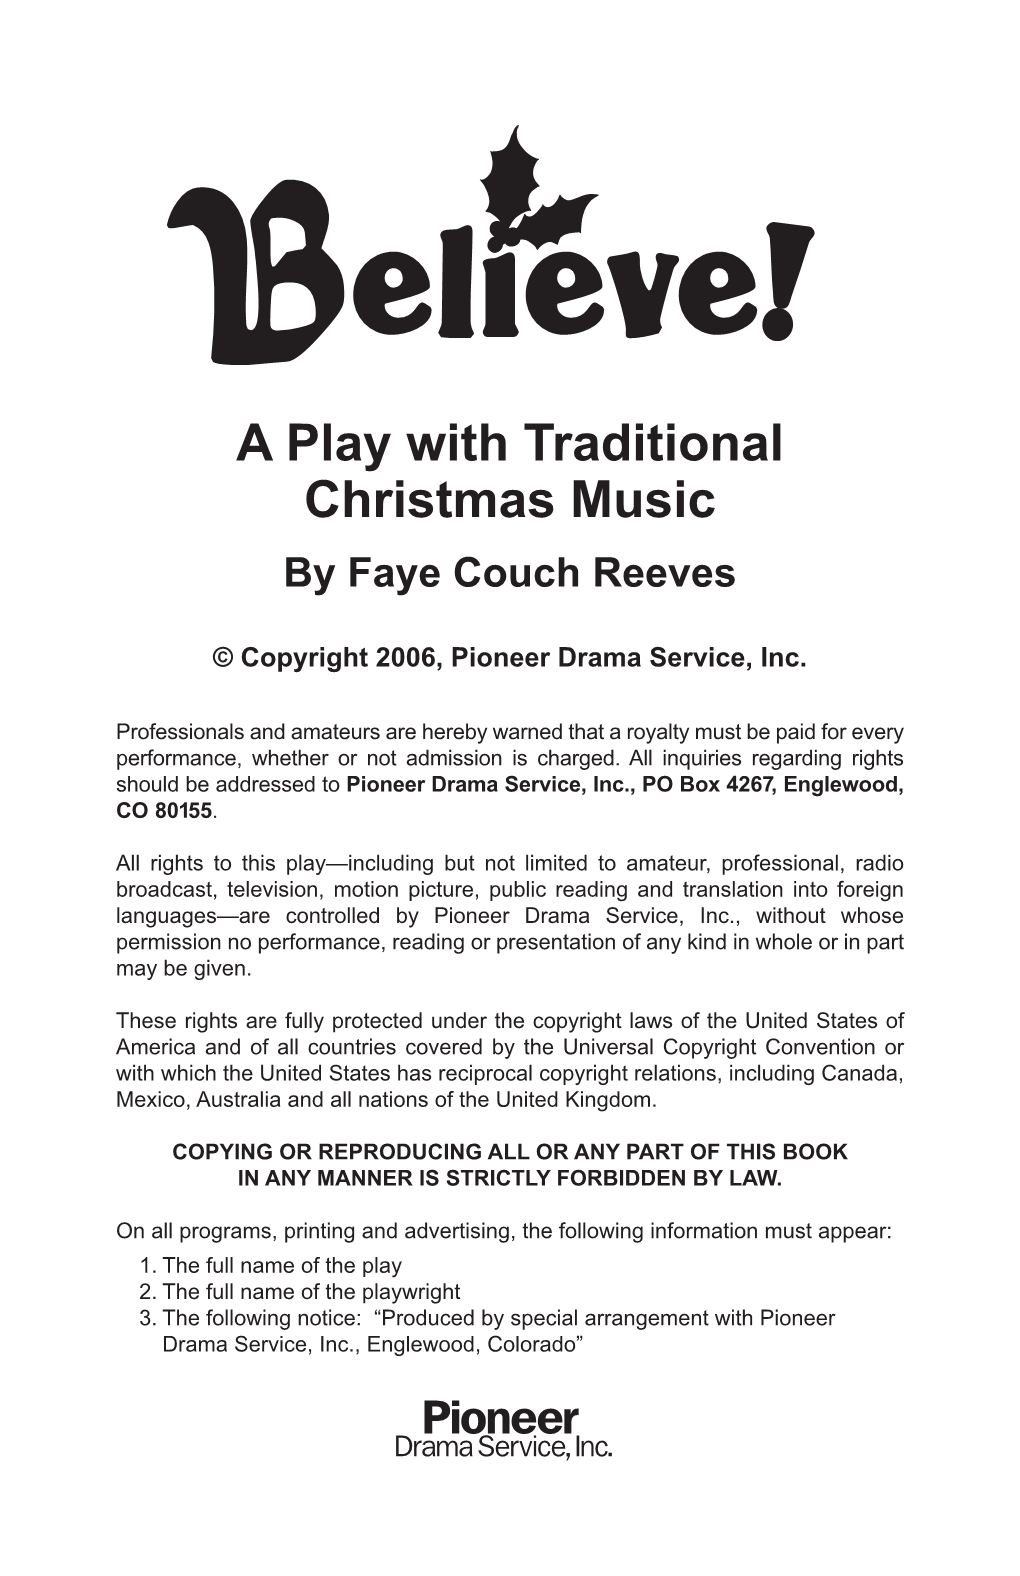 A Play with Traditional Christmas Music by Faye Couch Reeves